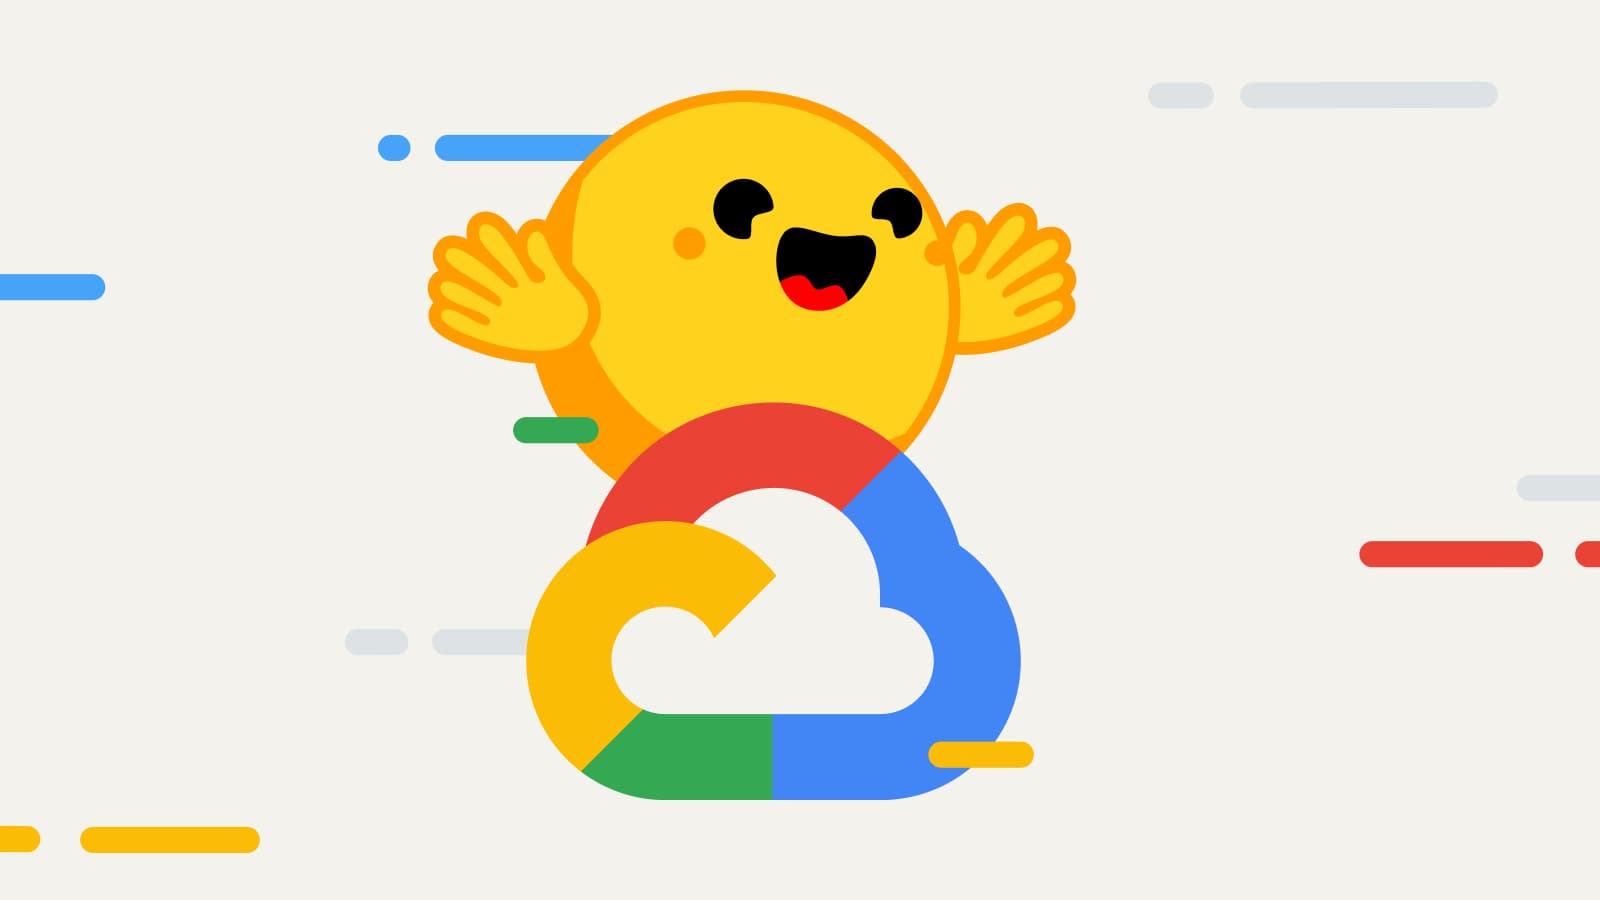 Google Cloud and Hugging Face join forces to advance open-source AI